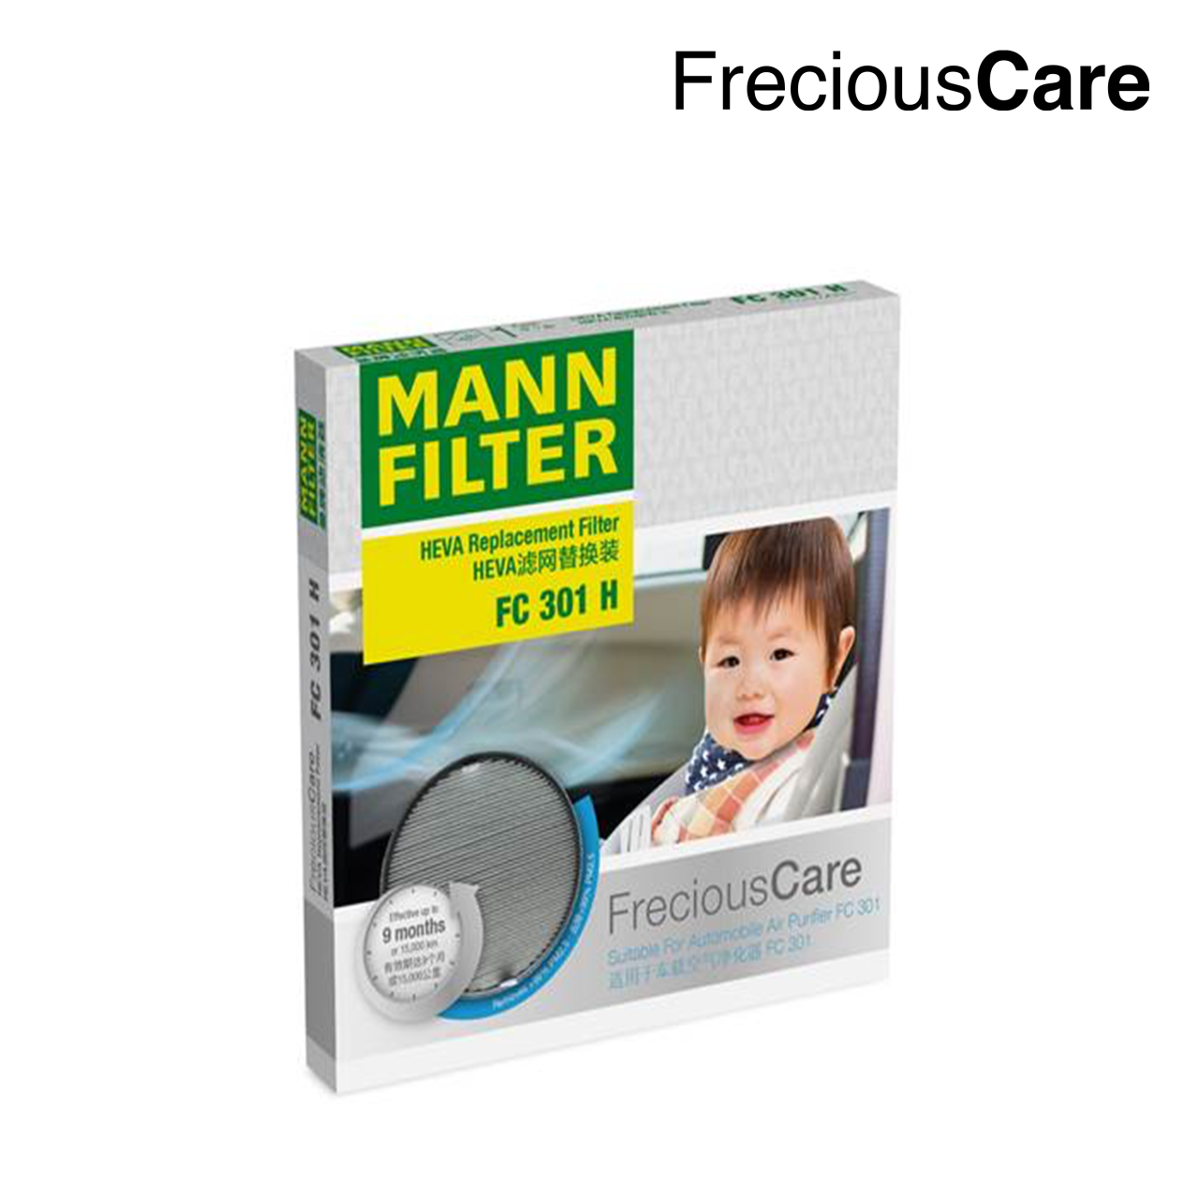 FreciousCare HEVA Replacement Filter (FC 301 H)